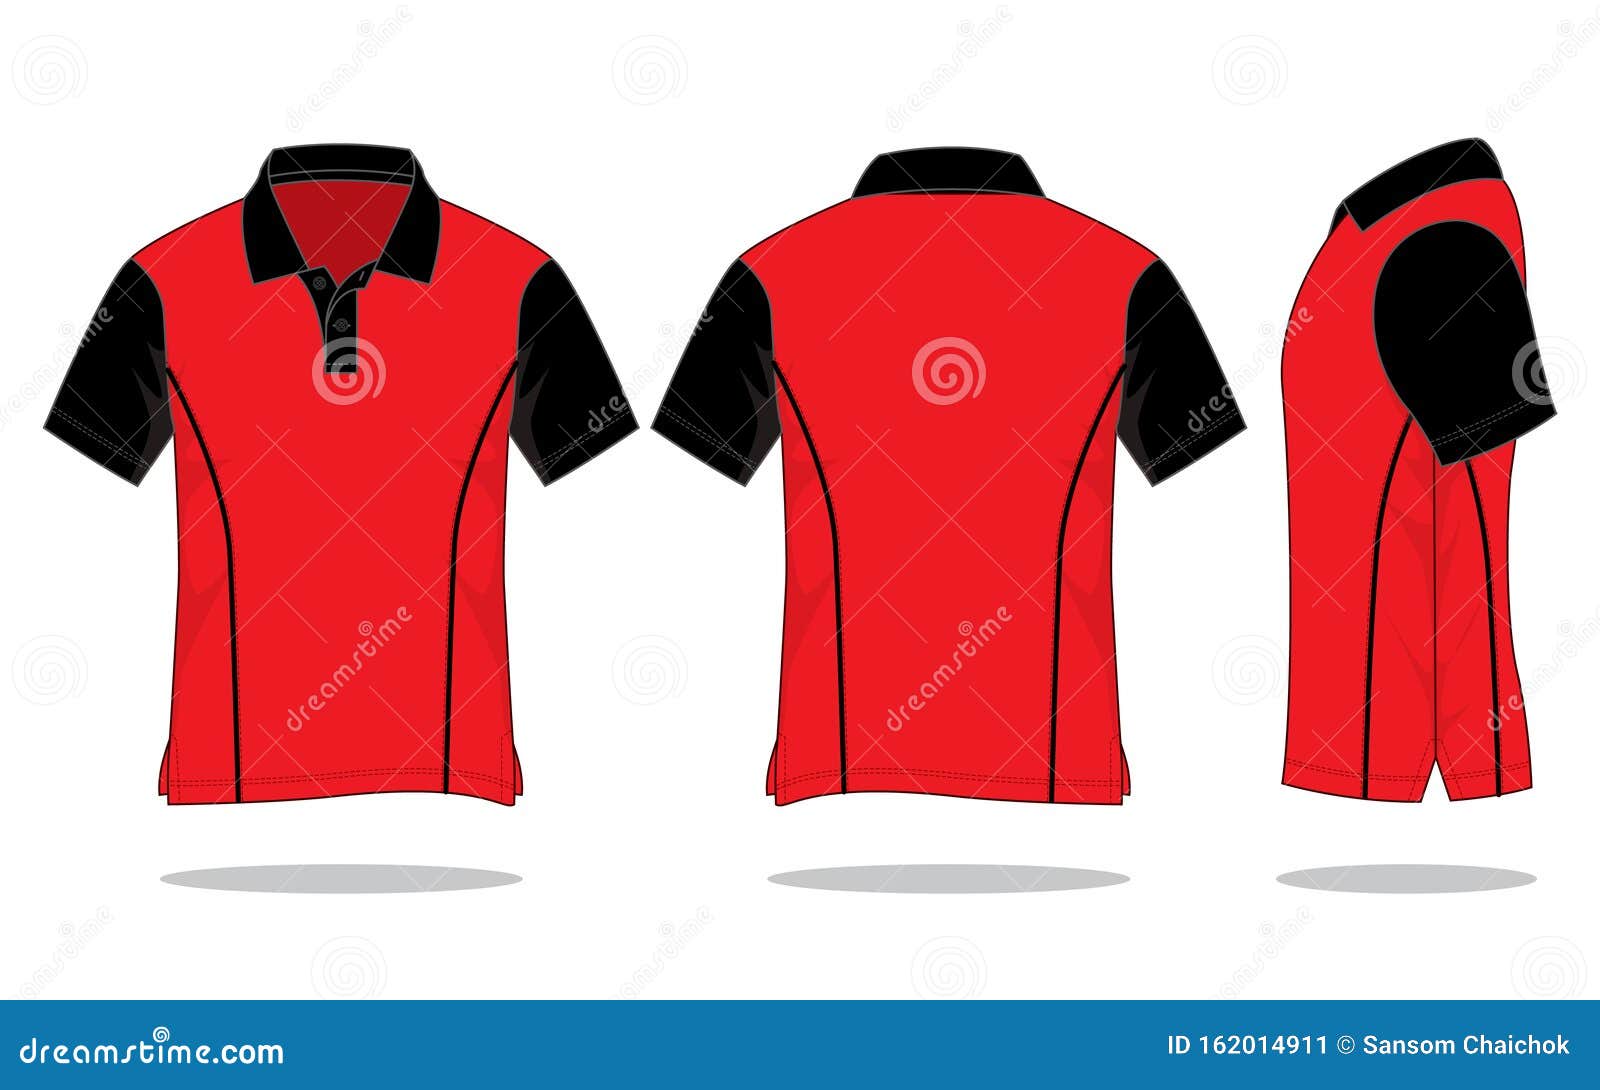 polo red and black